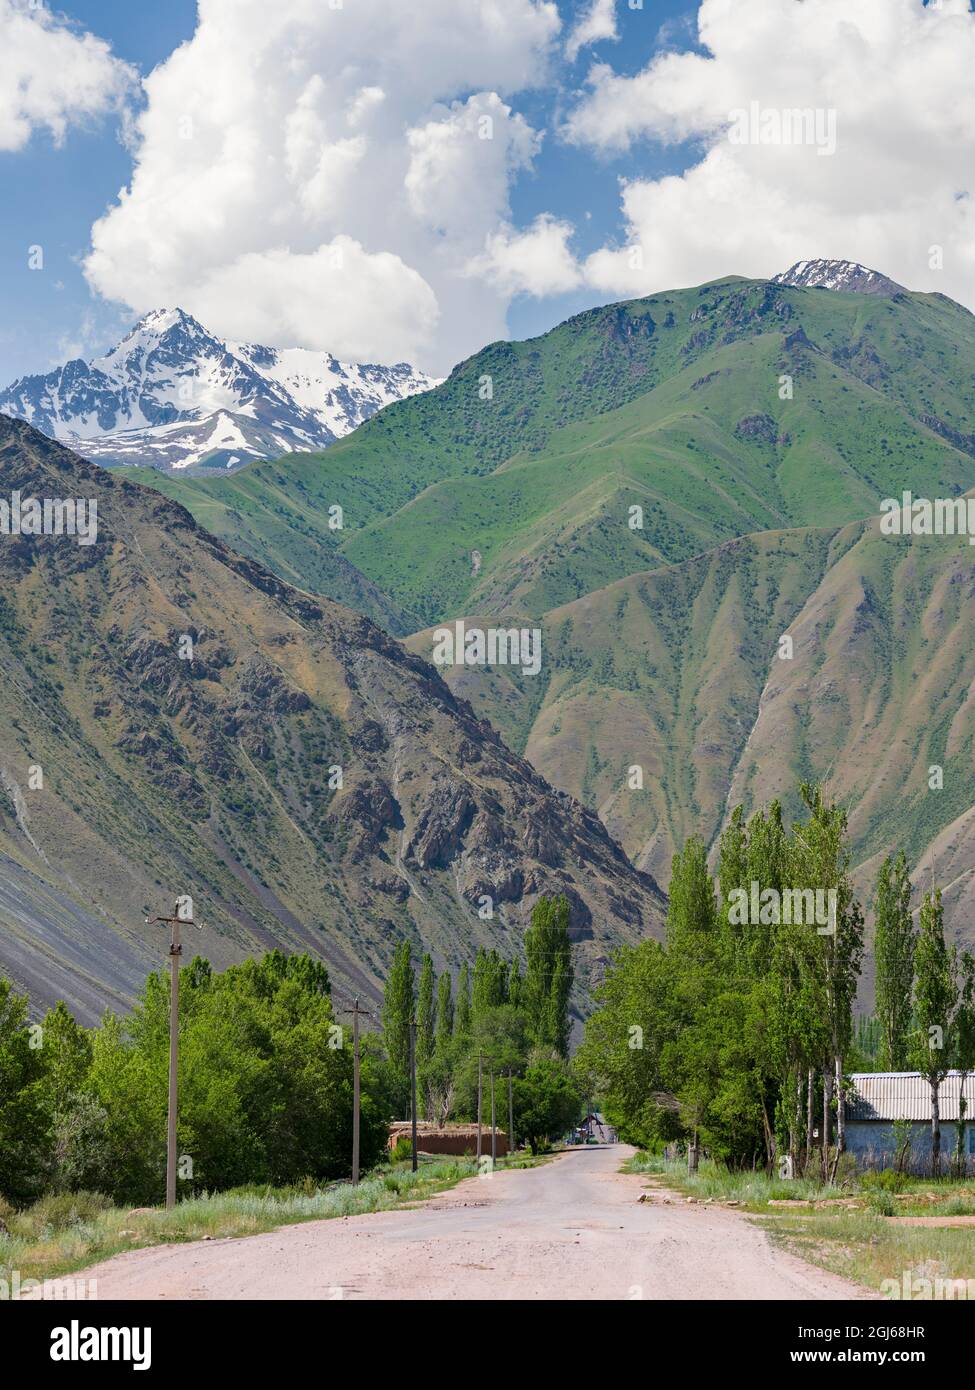 Village Kyzyl-Oy. Valley of river Suusamyr in the Tien Shan Mountains, Kyrgyzstan Stock Photo